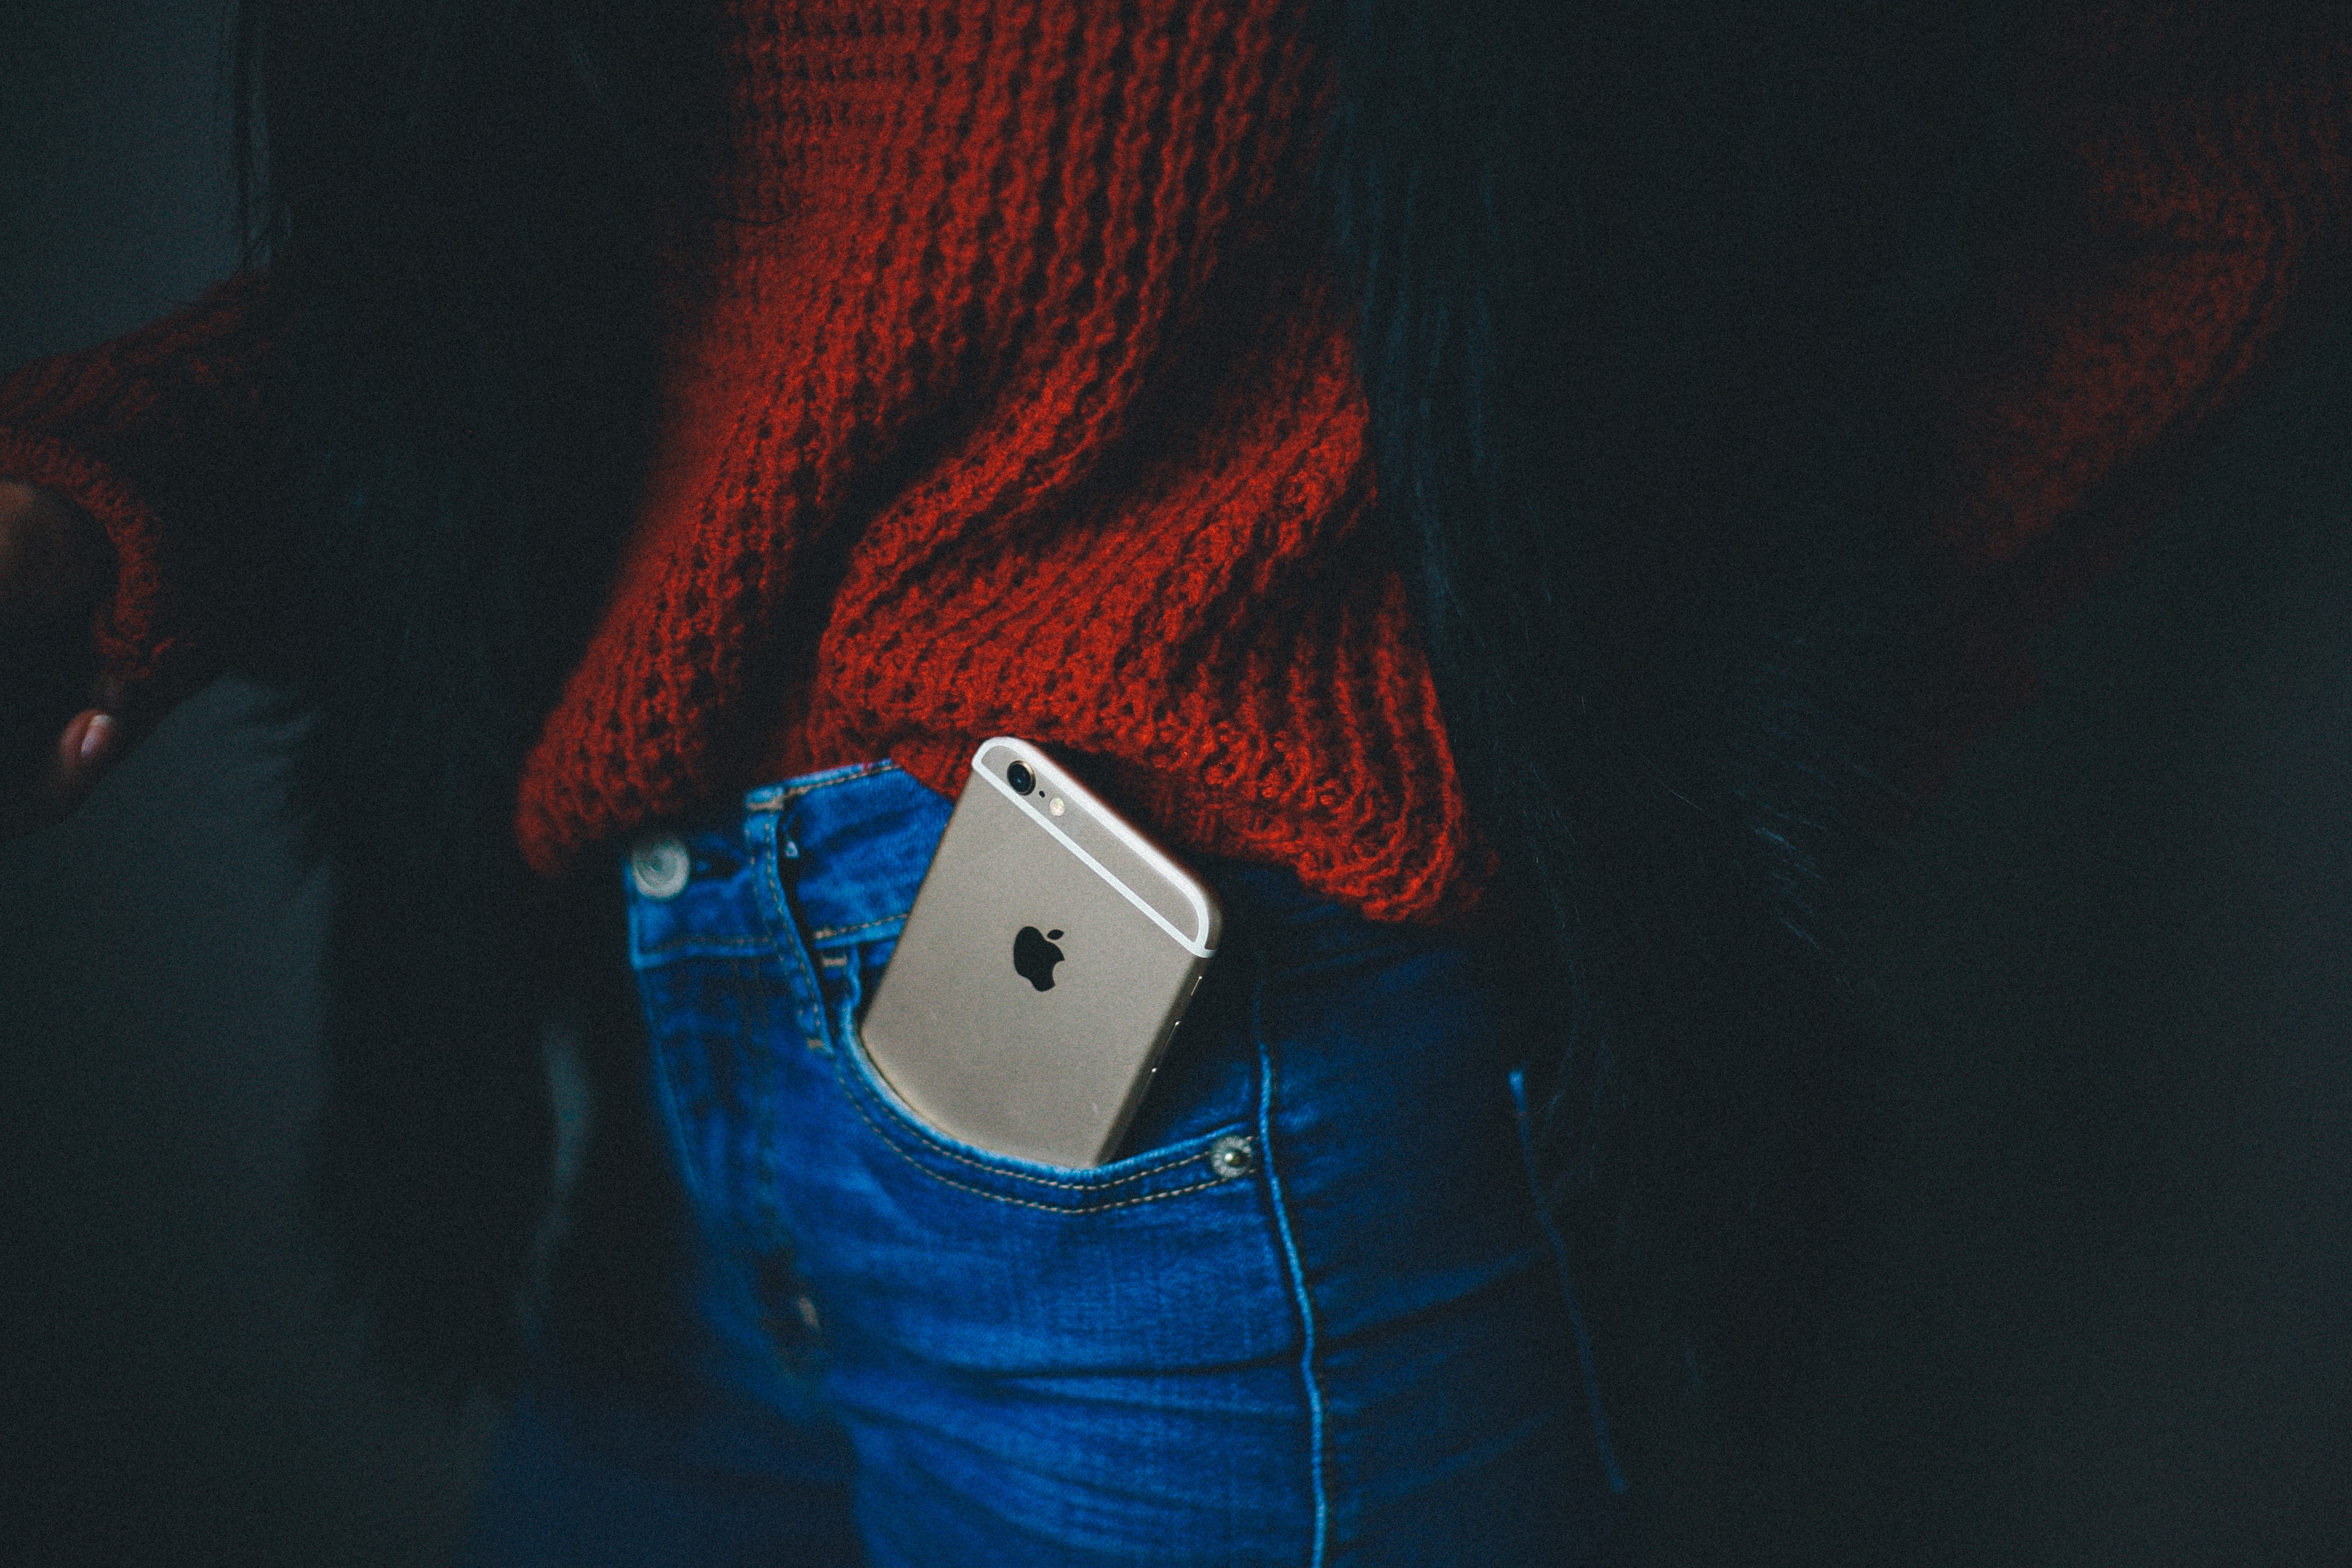 cell phone in woman's pocket